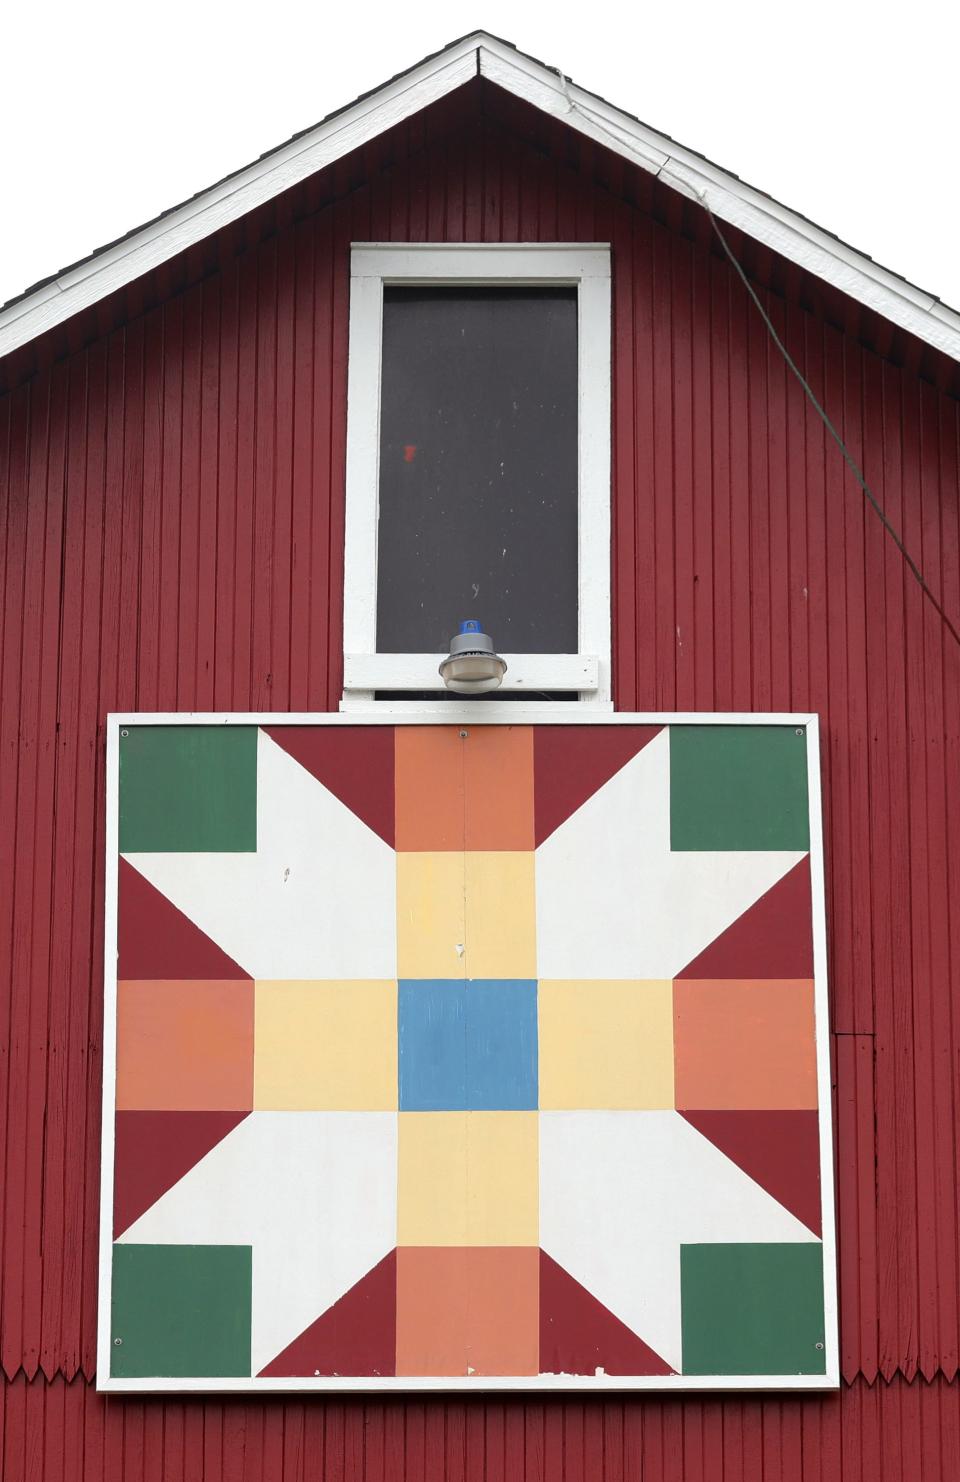 A barn at the Crown Point Ecology Center in Bath has a colorful quilt design.